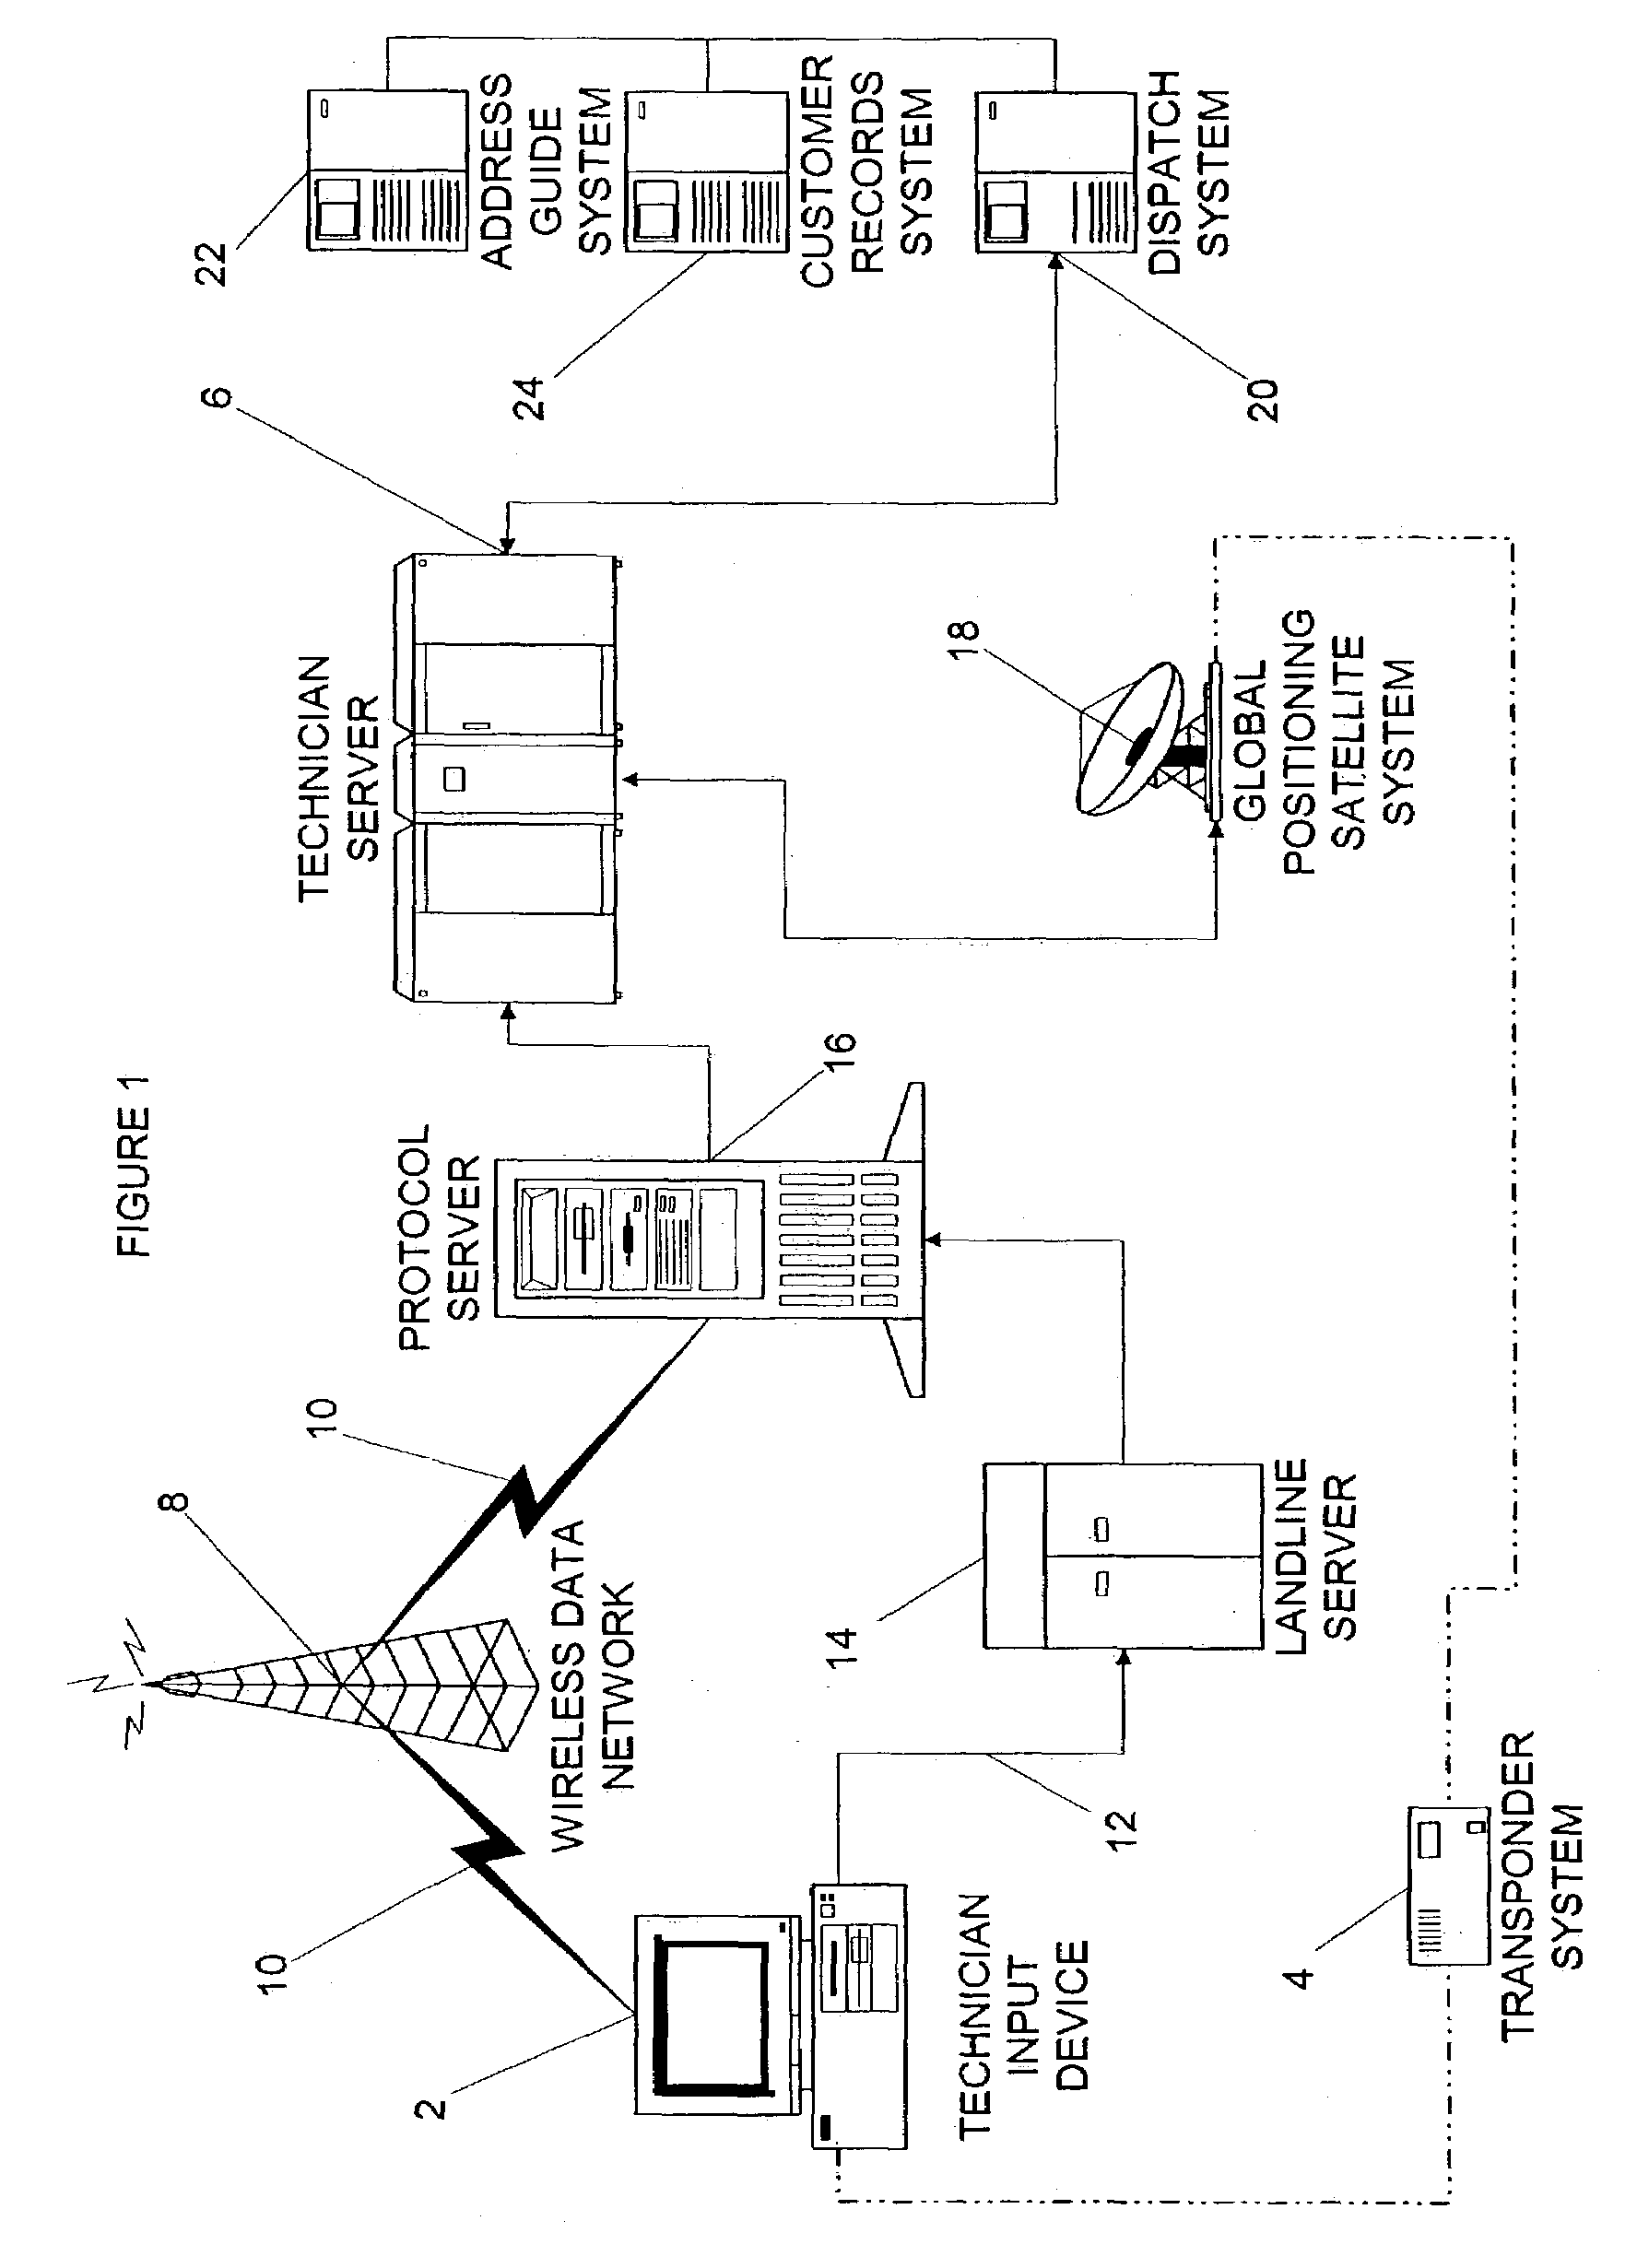 Methods and systems for determining a telecommunications service location using global satellite positioning